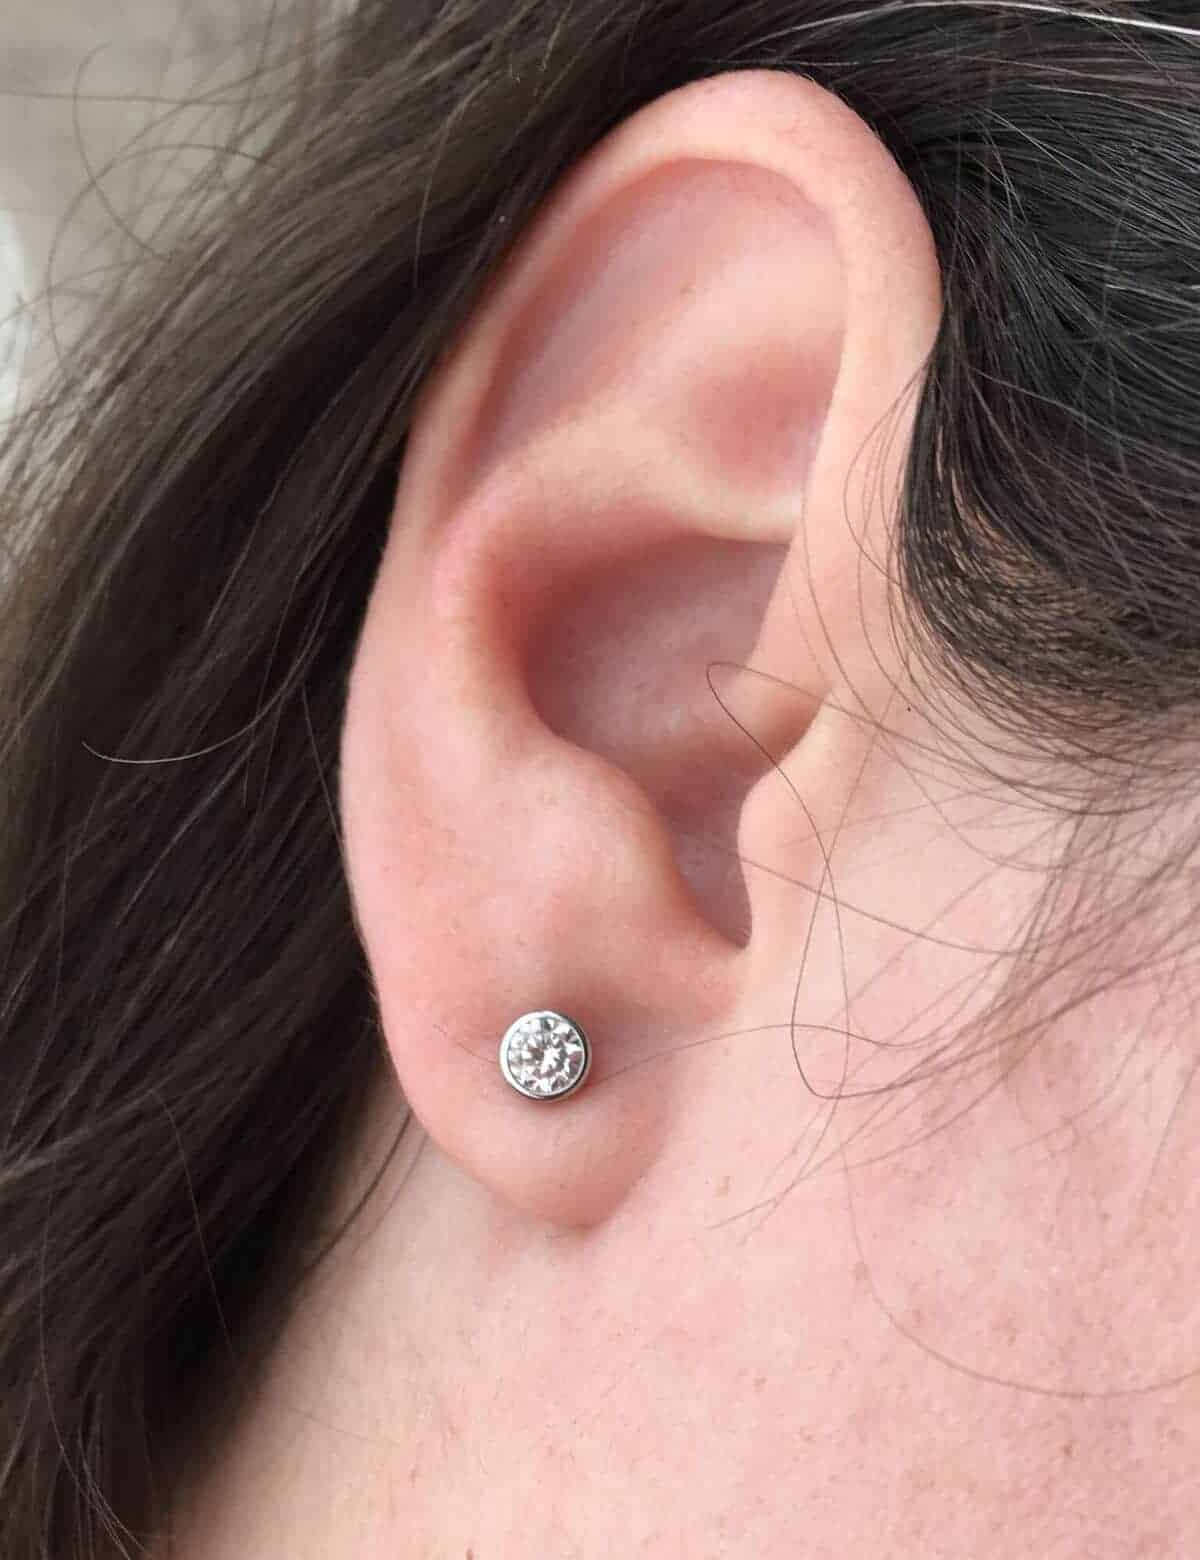 https://comfyearrings.com/wp-content/uploads/2017/07/Crystal-Clear-Ear.jpg